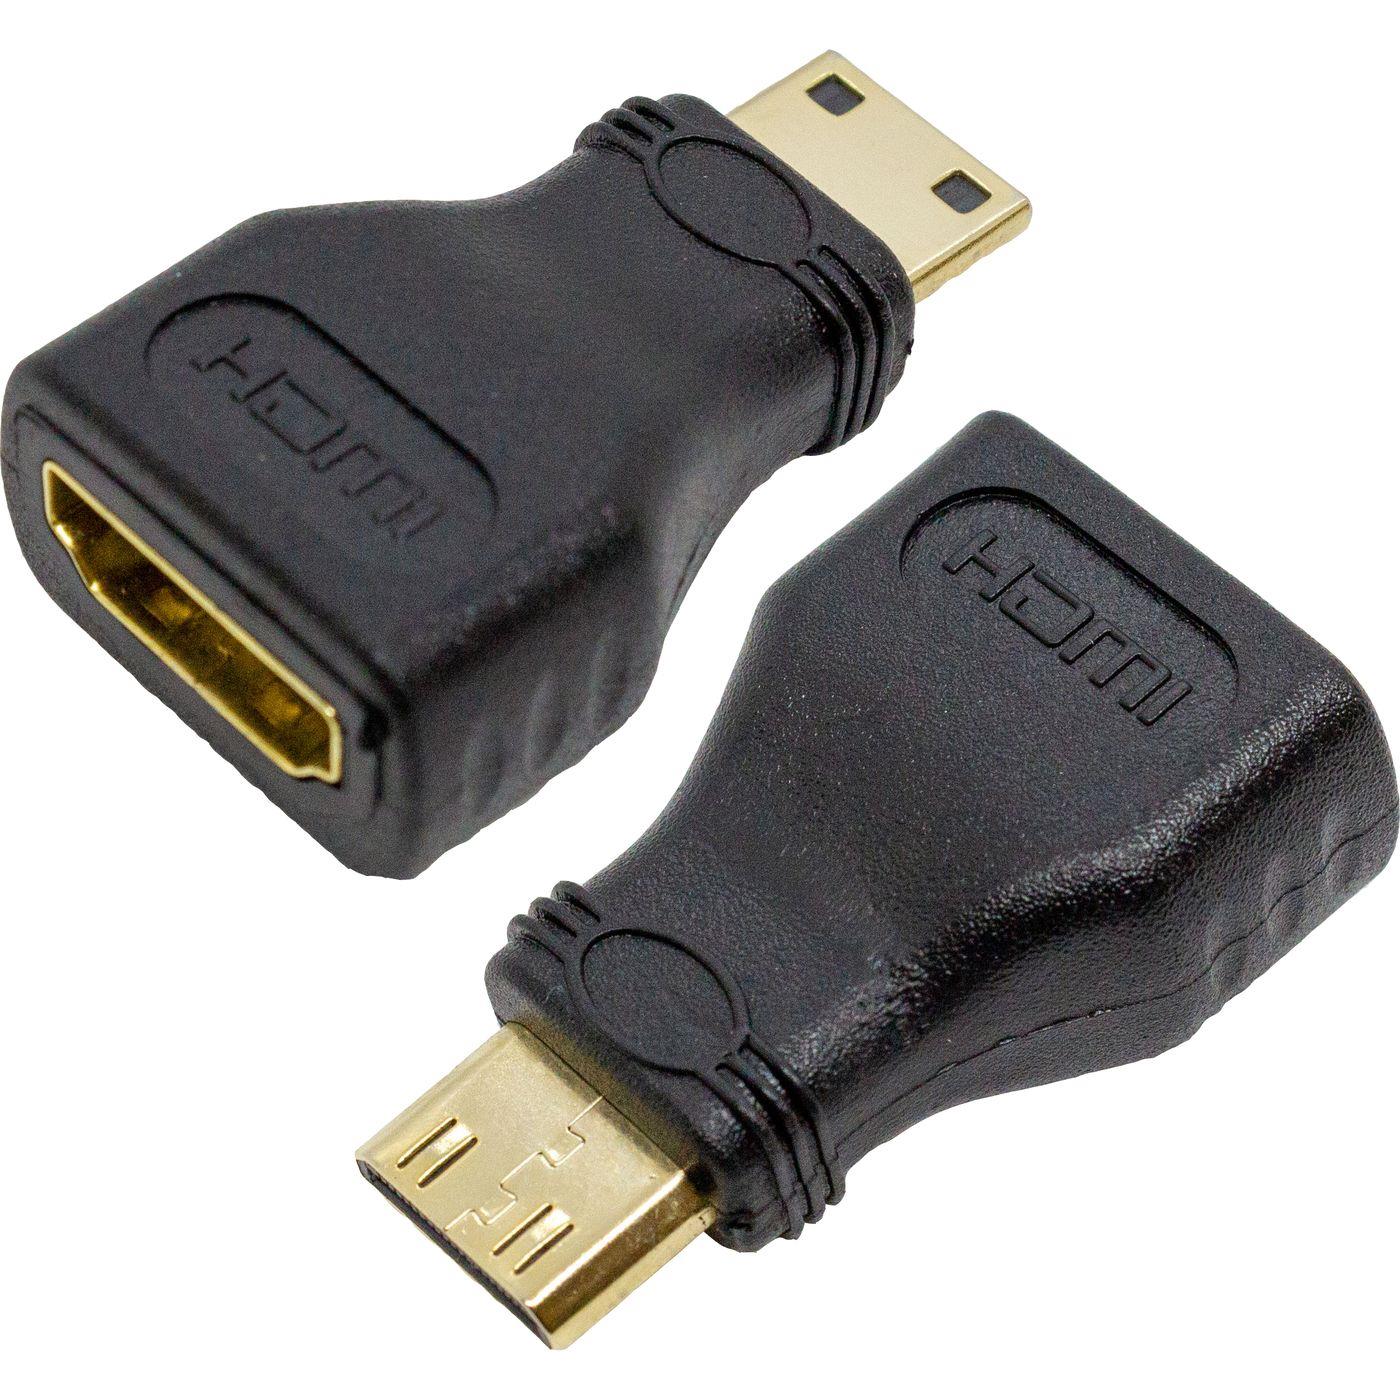 HDMI Adapter Socket to Mini HDMI Plug FULL HD gold plated Contacts for Projector